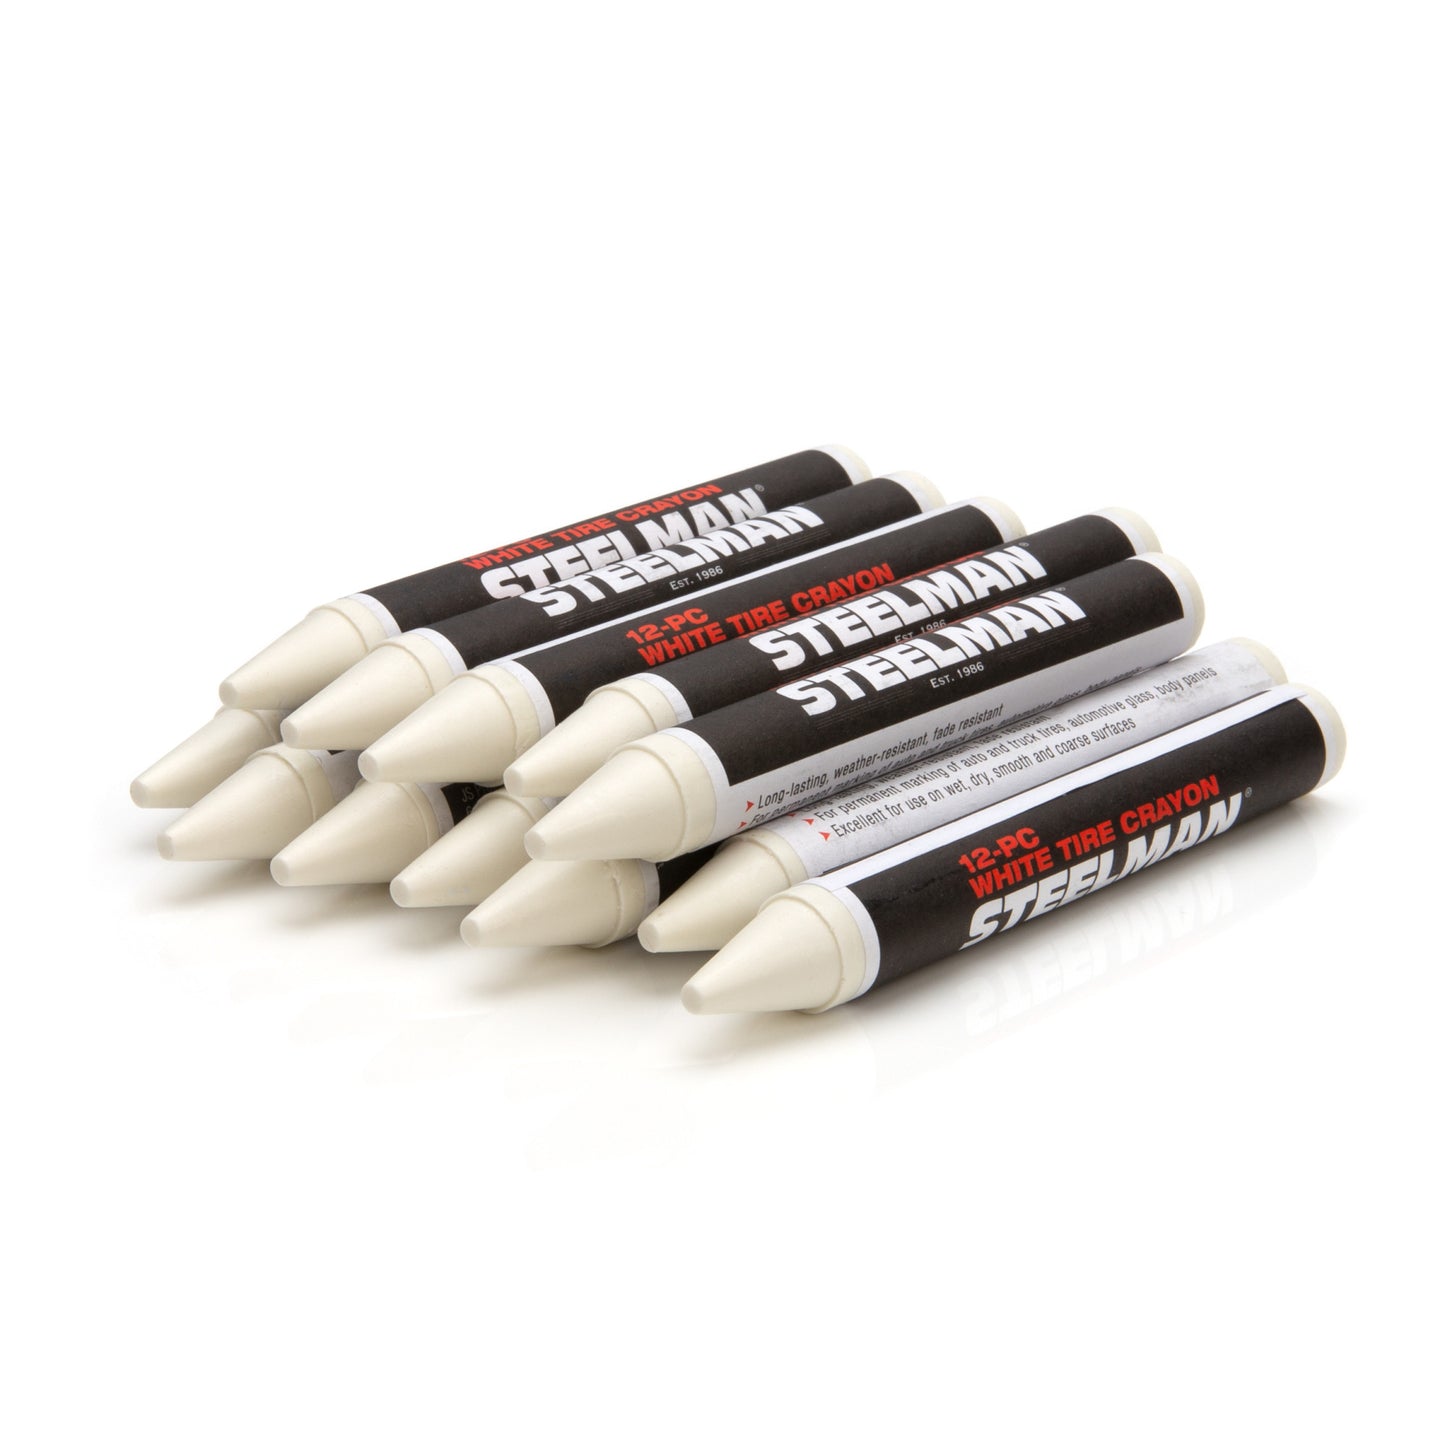 White Tire Marking Crayons, Box of 12 (10-Pack)